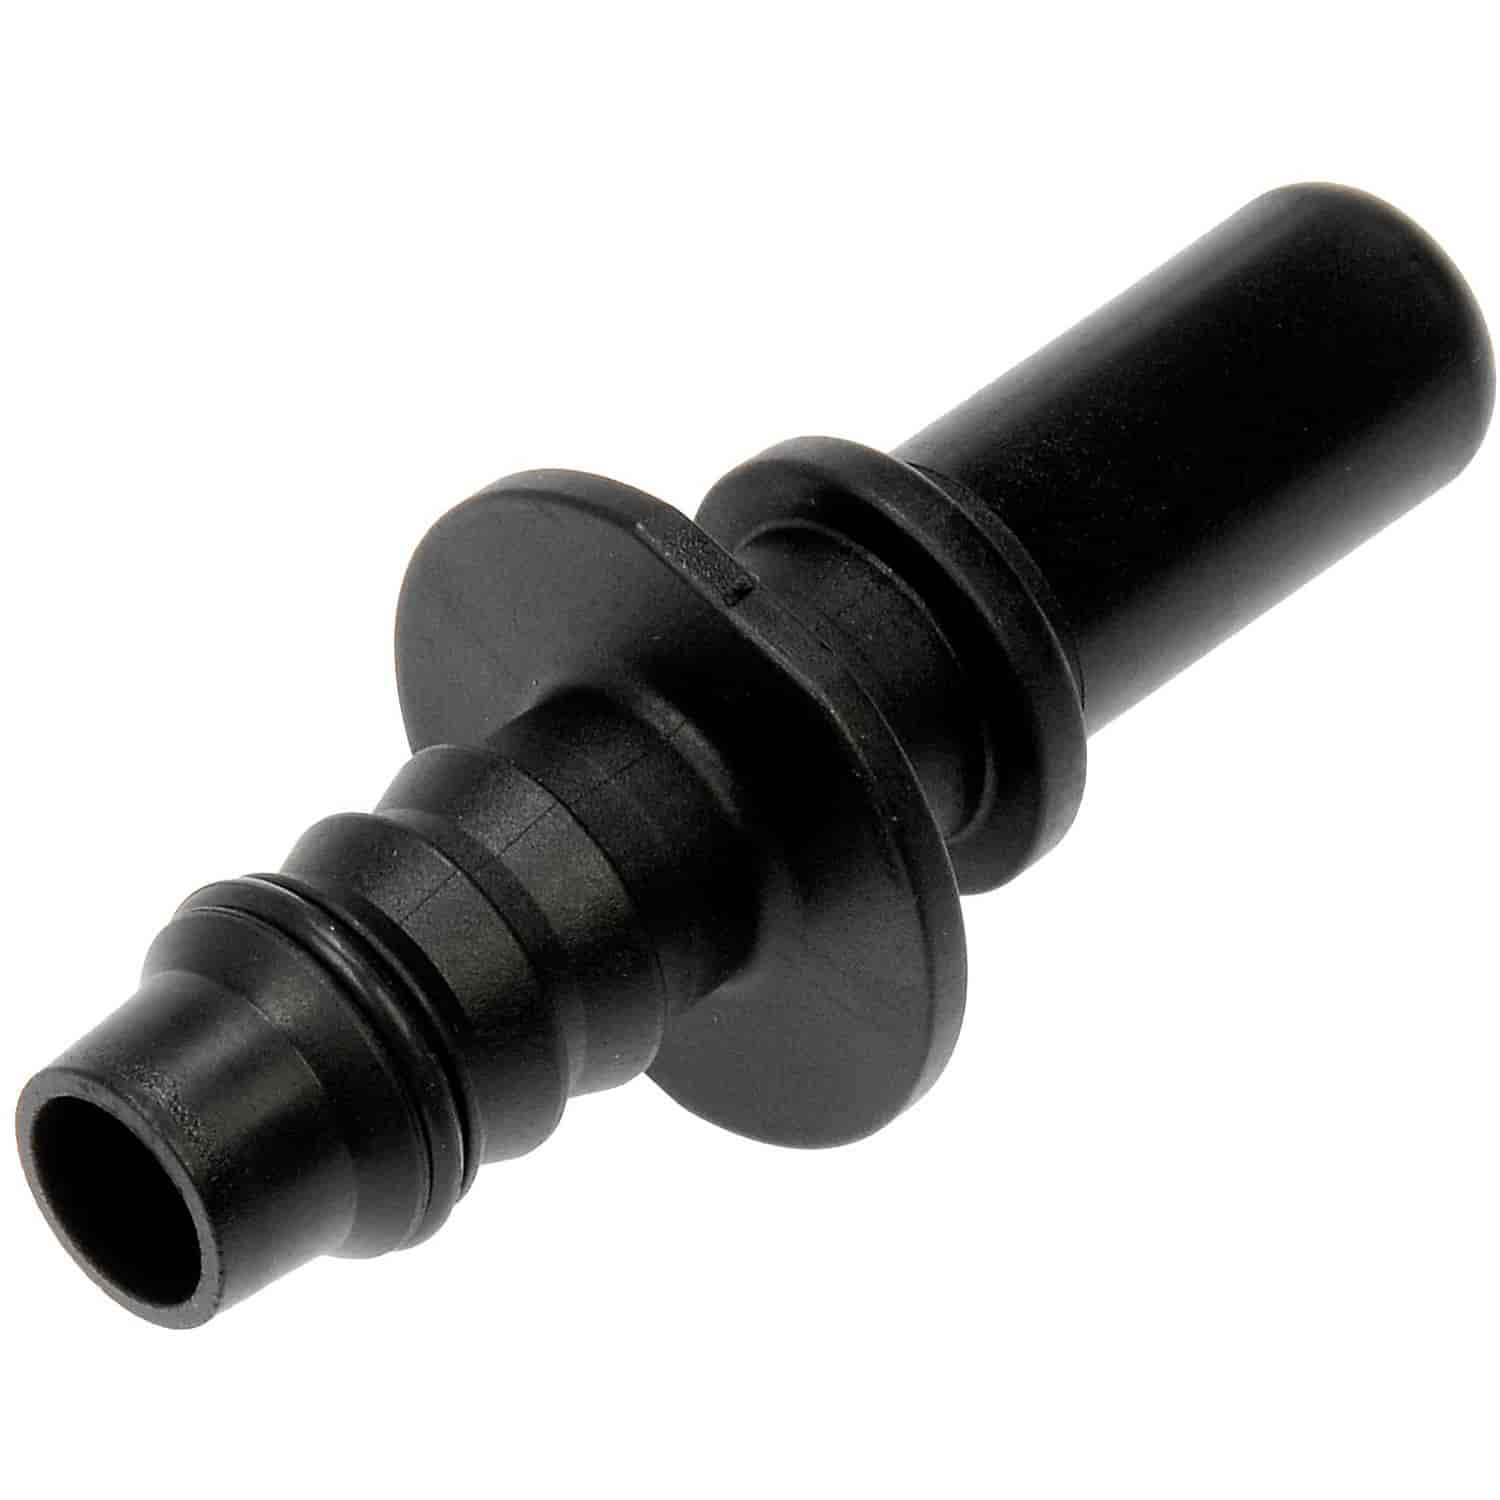 Male Connector 12mm Steel to 10mm Nylon with